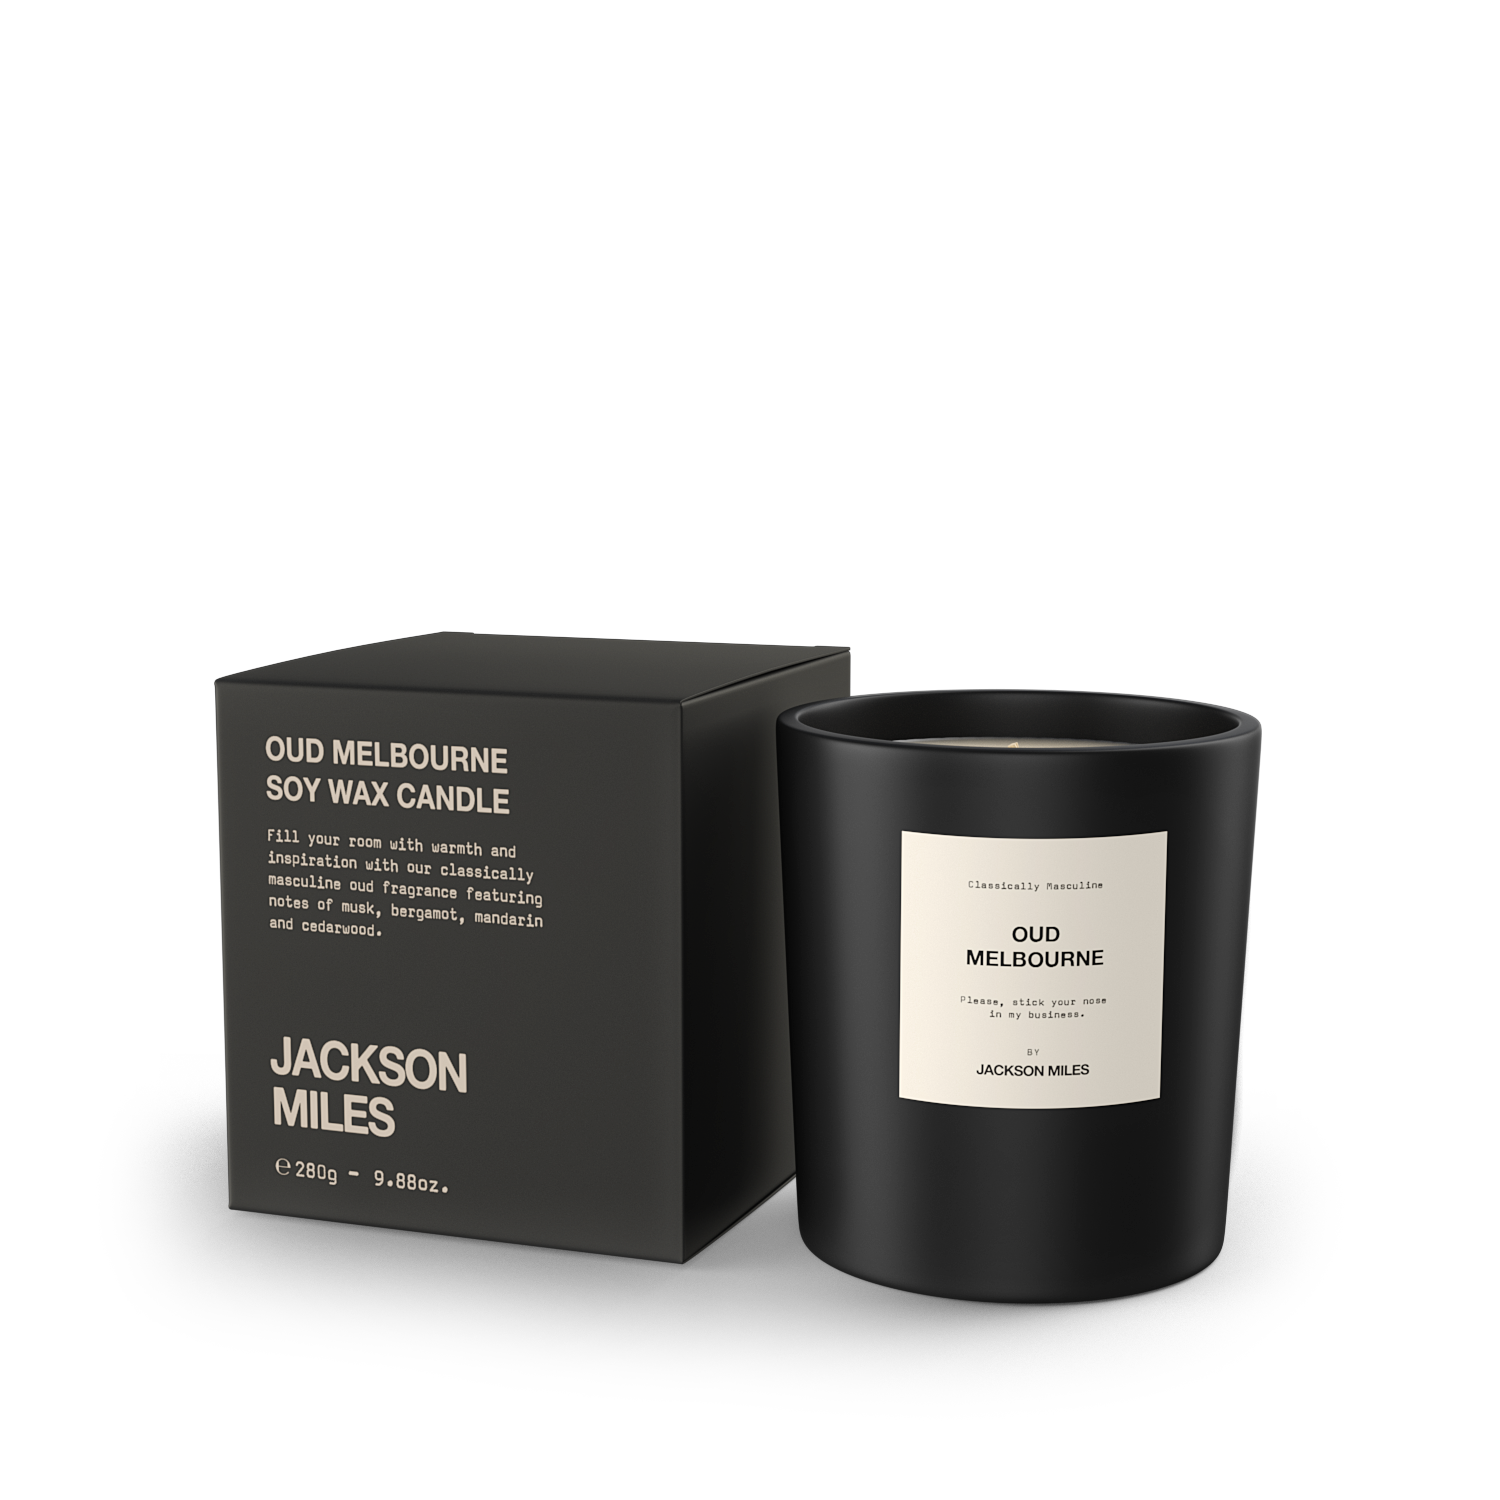 BEON.COM.AU You asked, we listened. One of our most popular scents, a warm and woody masculine scent with notes of Bergamot, Sandalwood and Lavender.  Housed in a beautiful black vessel with a black lid, our candles are designed to fill small to medium-sized spaces with rustic, classy scents.  Approx 60 hour... Jackson Miles at BEON.COM.AU